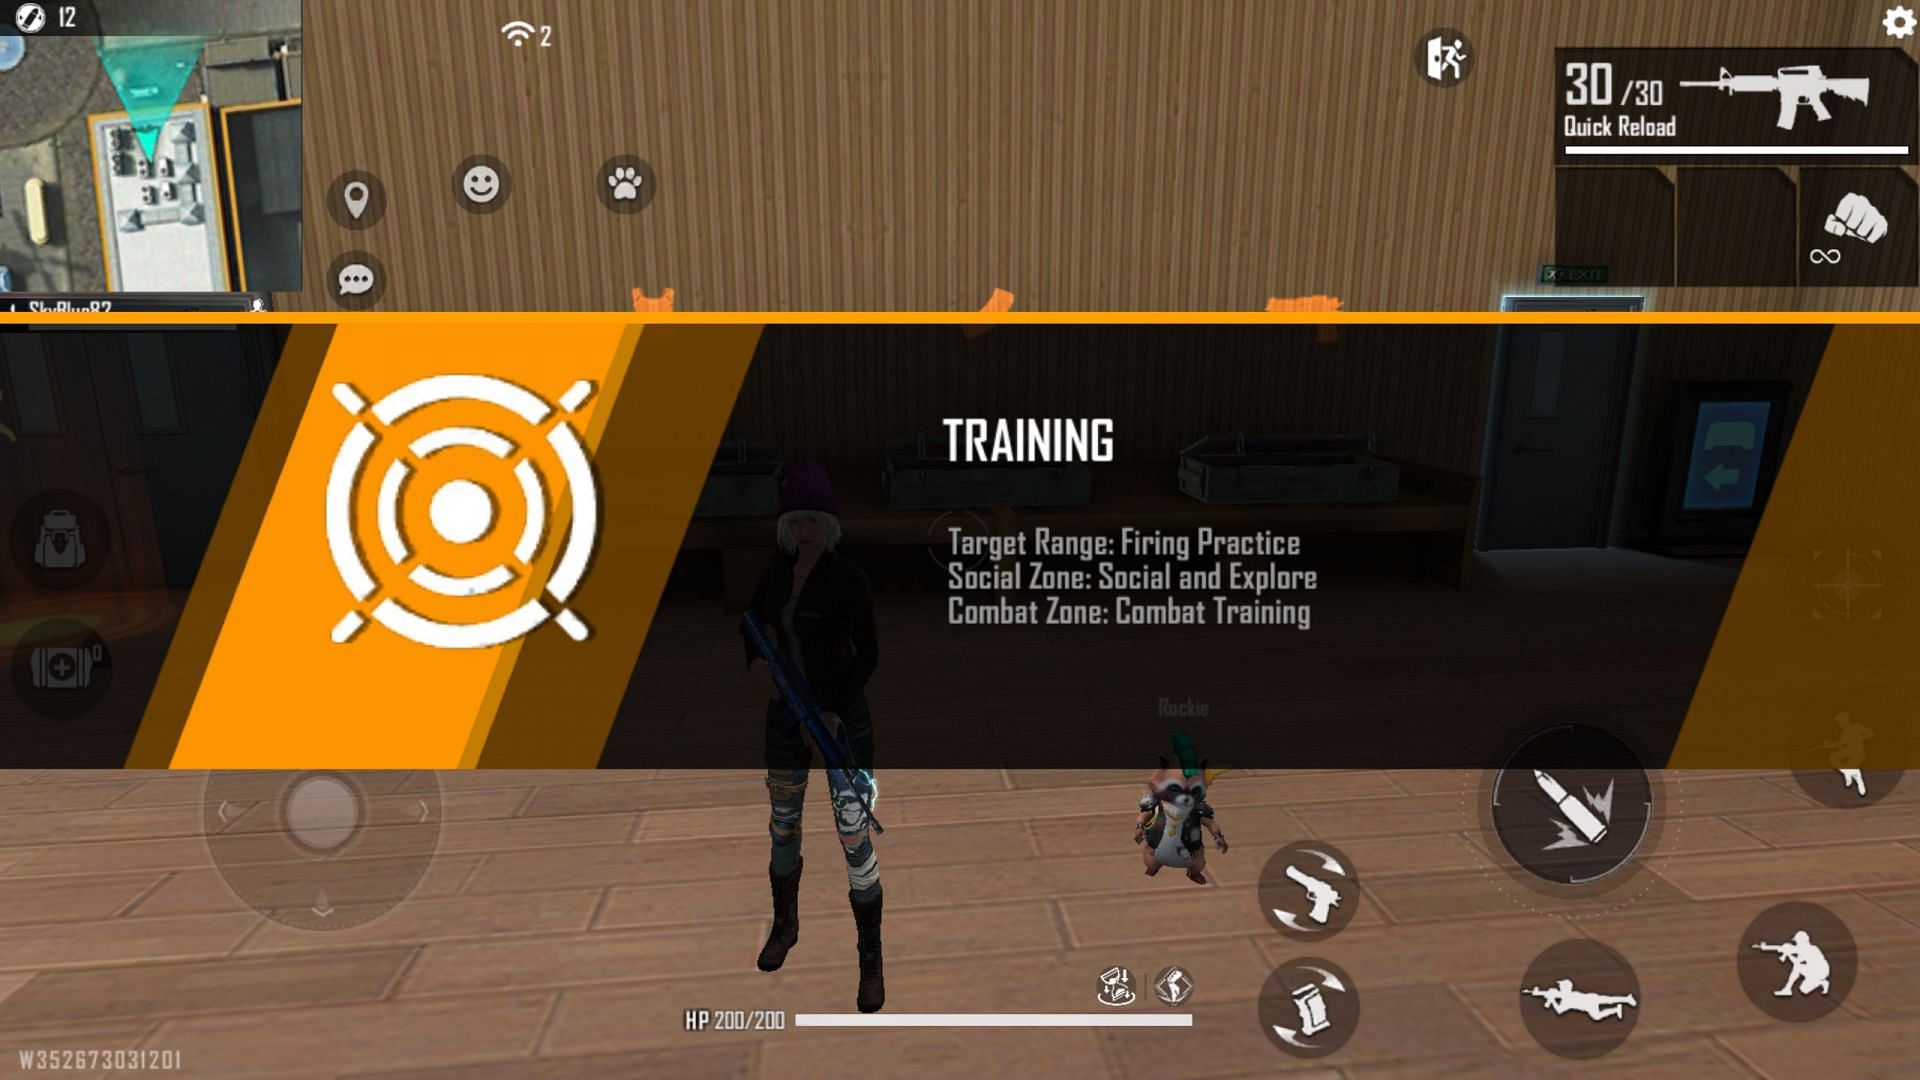 Users can first practice (Image via Free Fire)